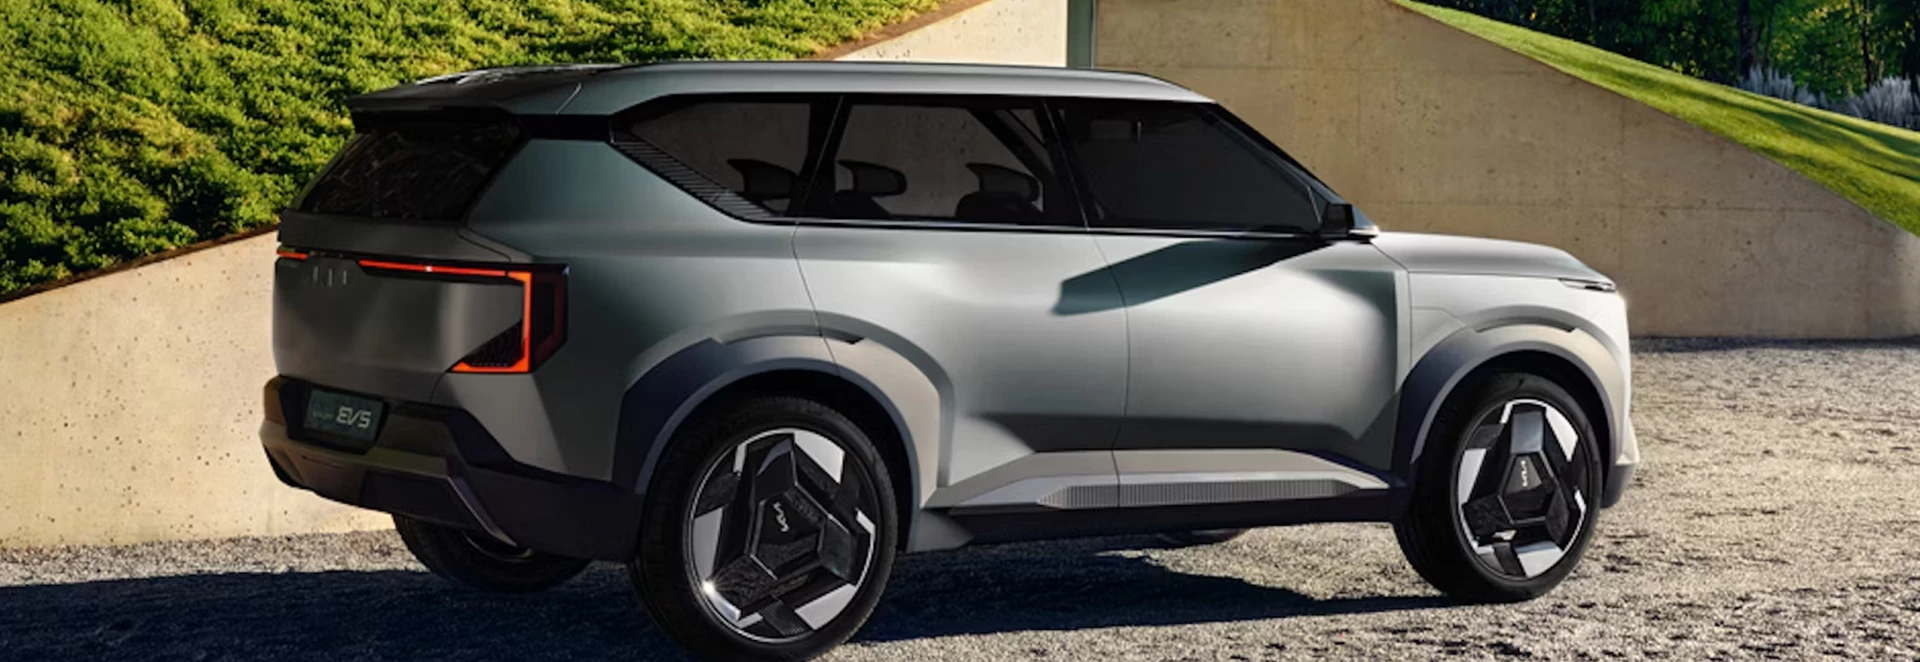 Kia EV5 Electric SUV: A Closer Look at the Upcoming Model 